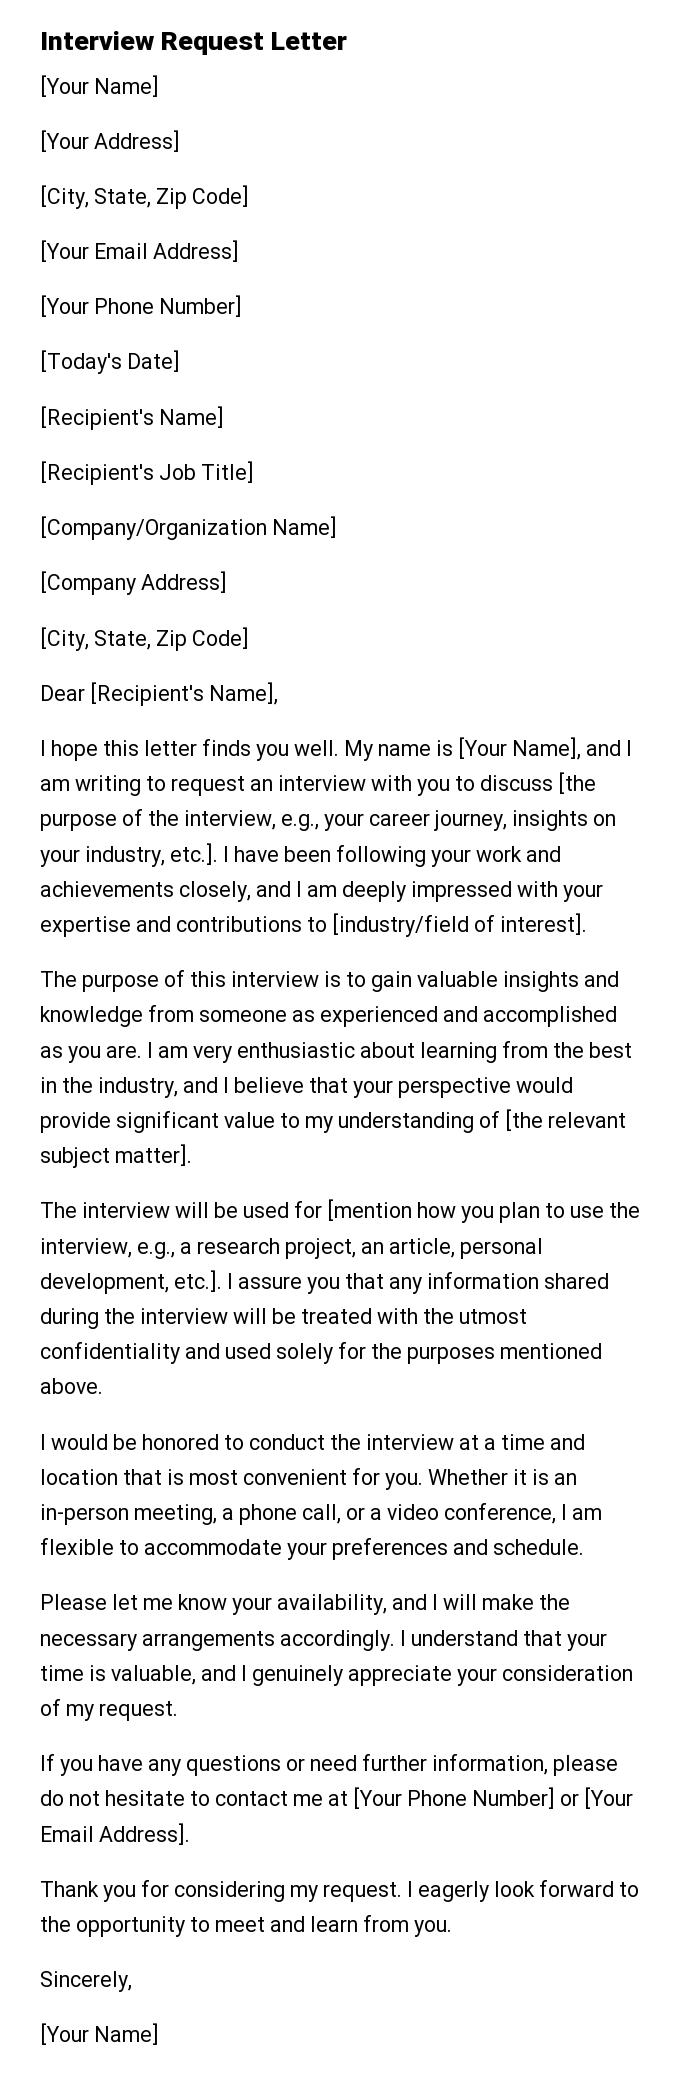 Interview Request Letter